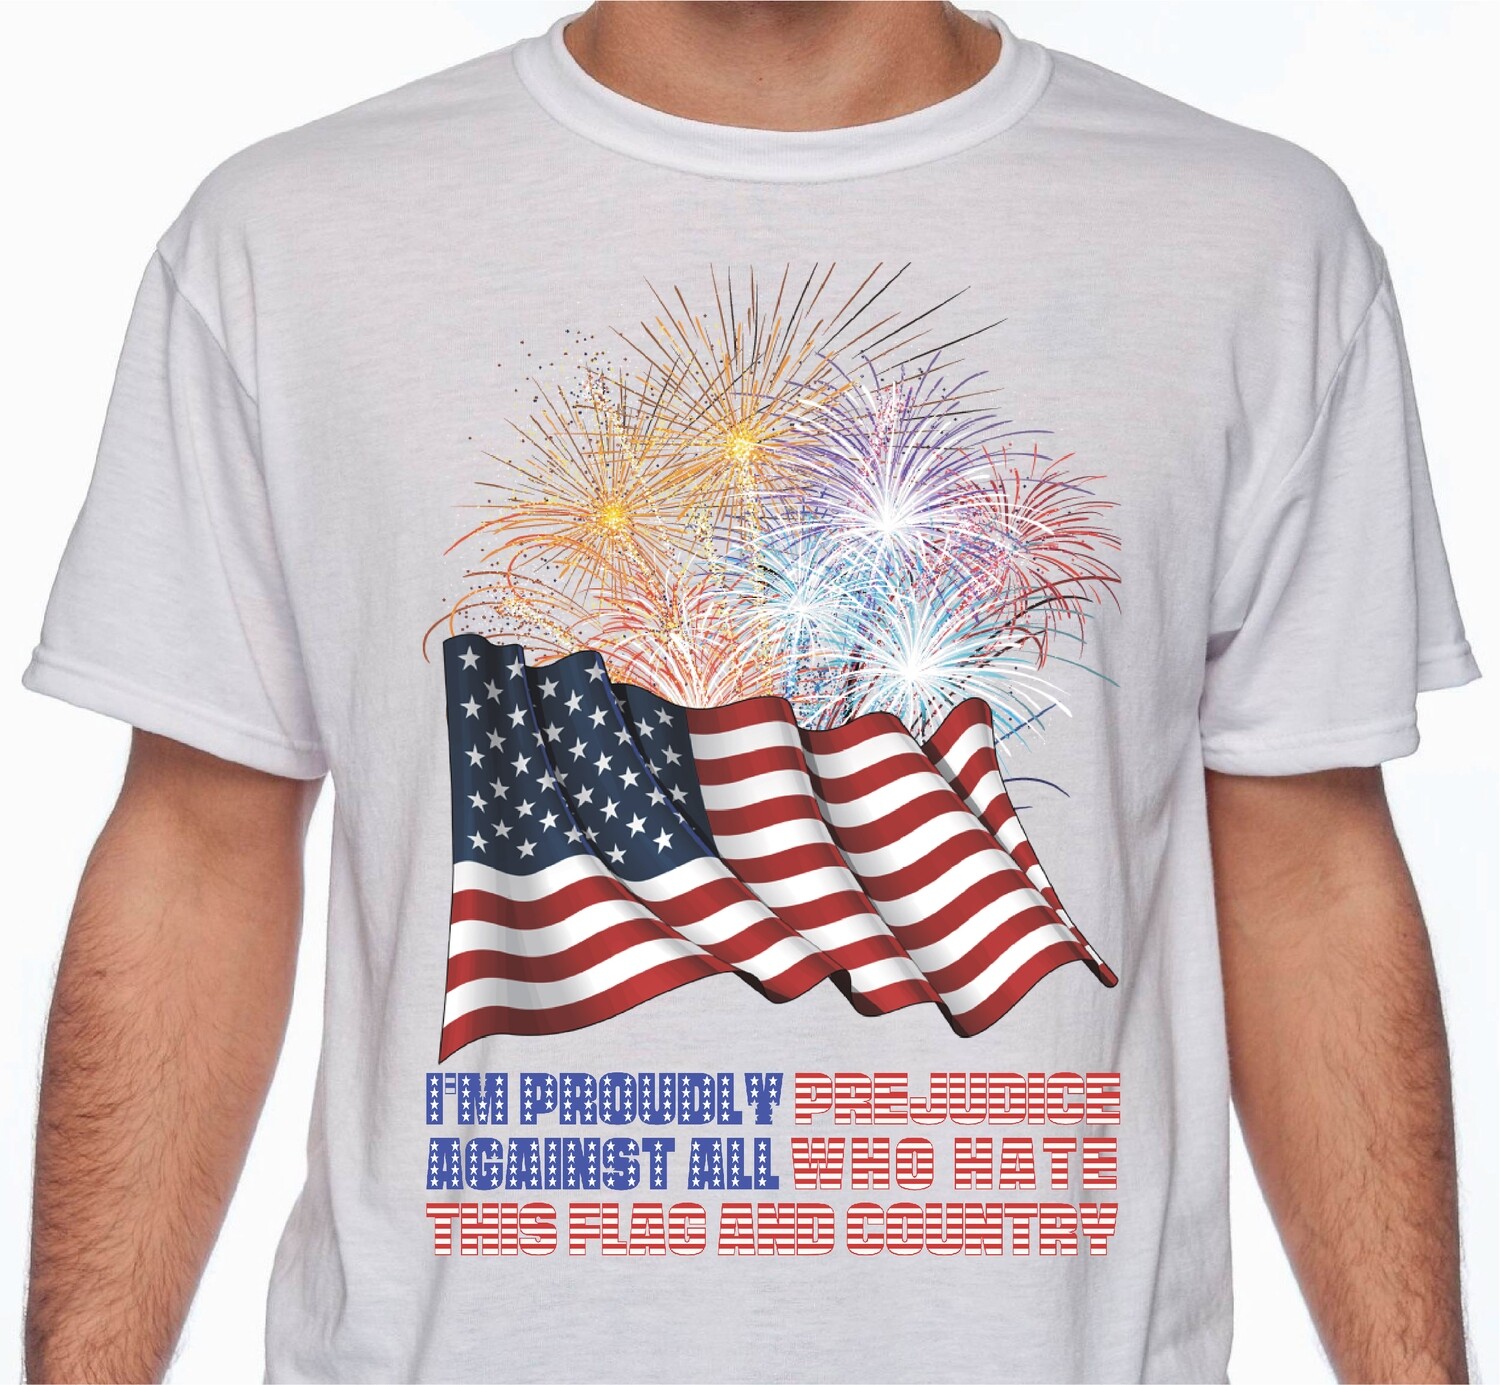 I'M PROUD FLAG COUNTRY T-SHIRT